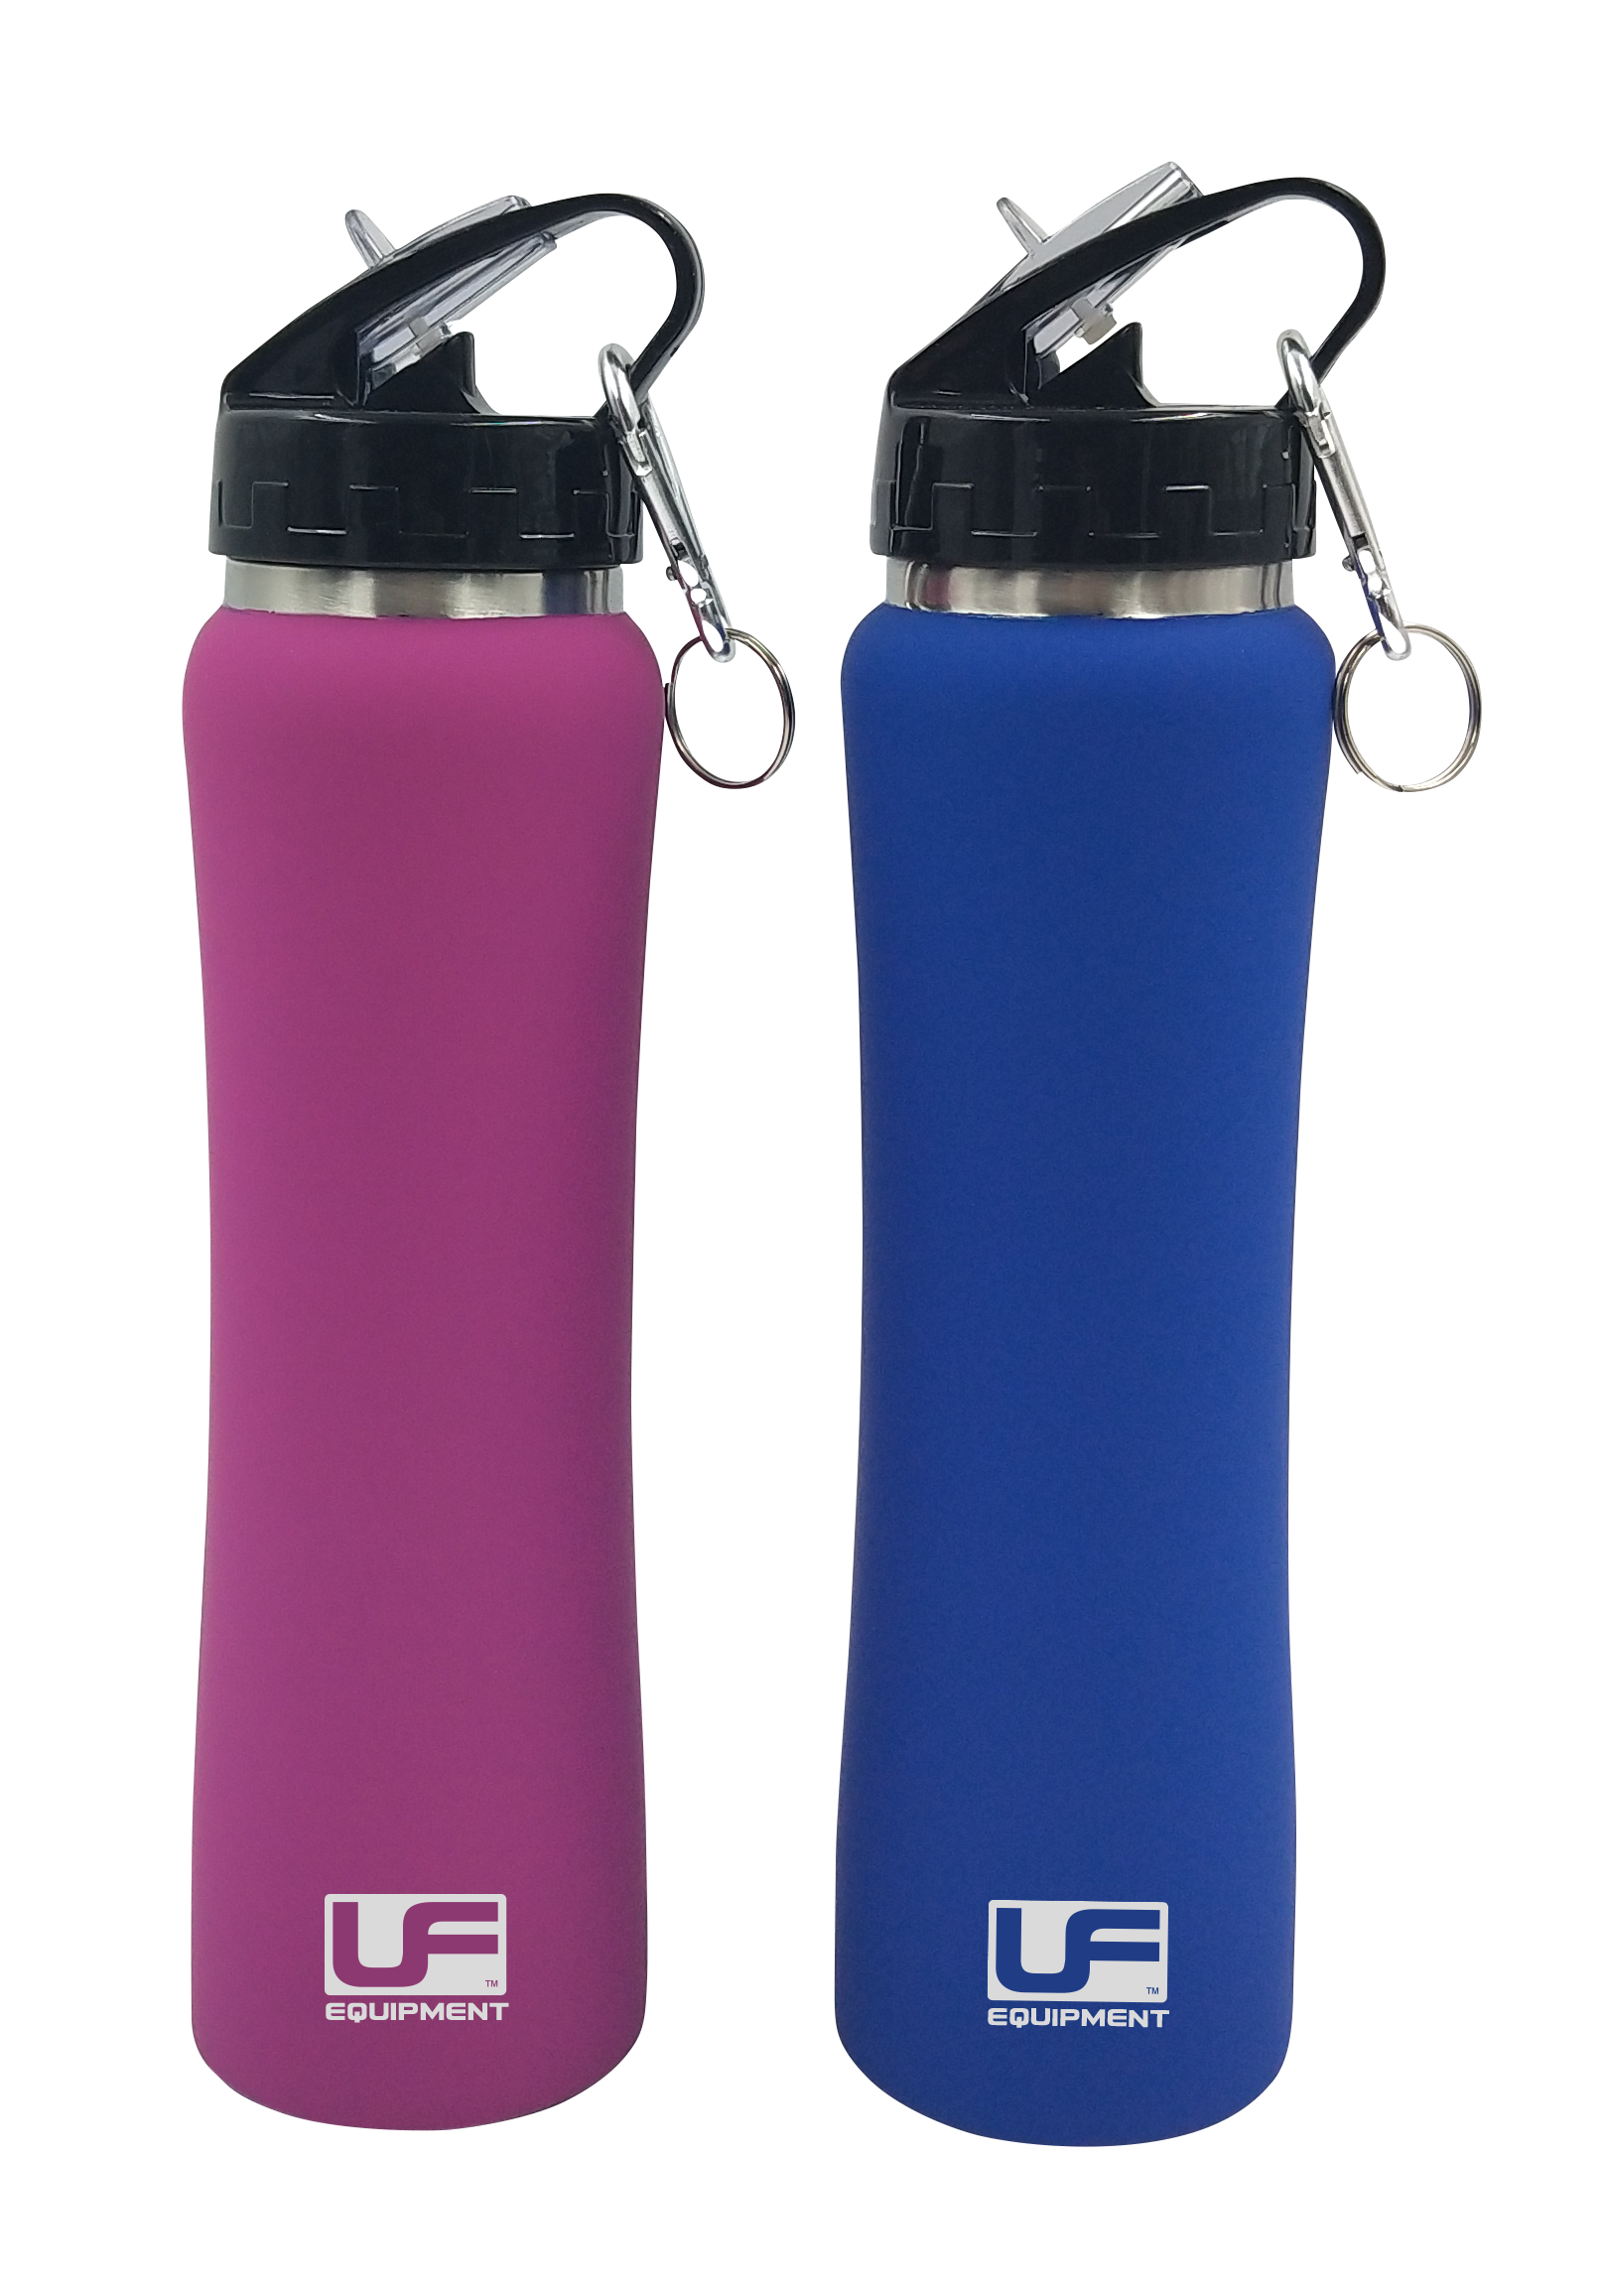 QD440 Details about   Quadra Water Bottle and Holder 500ml Free Sports Gym School Running 